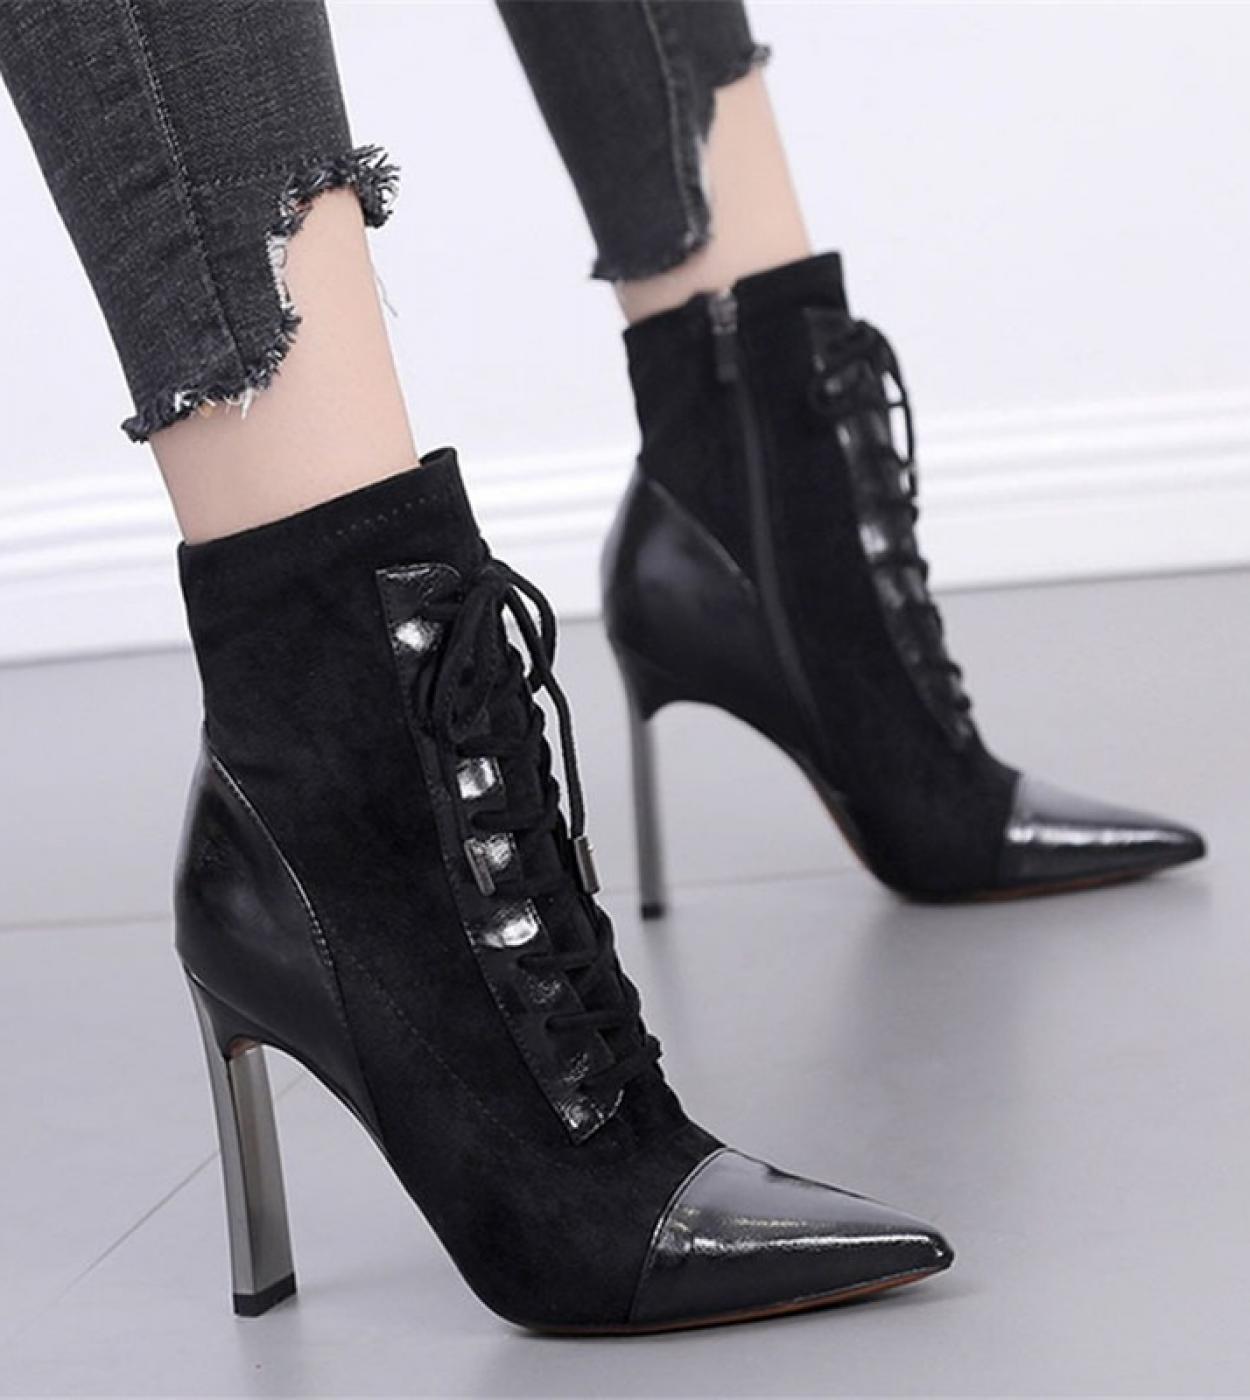 Luxury Peacock Pattern Embossed Women Boots New Platform Crystal Heel Leather Shoes  Lady Rhinestone Zip Stiletto Ankle 